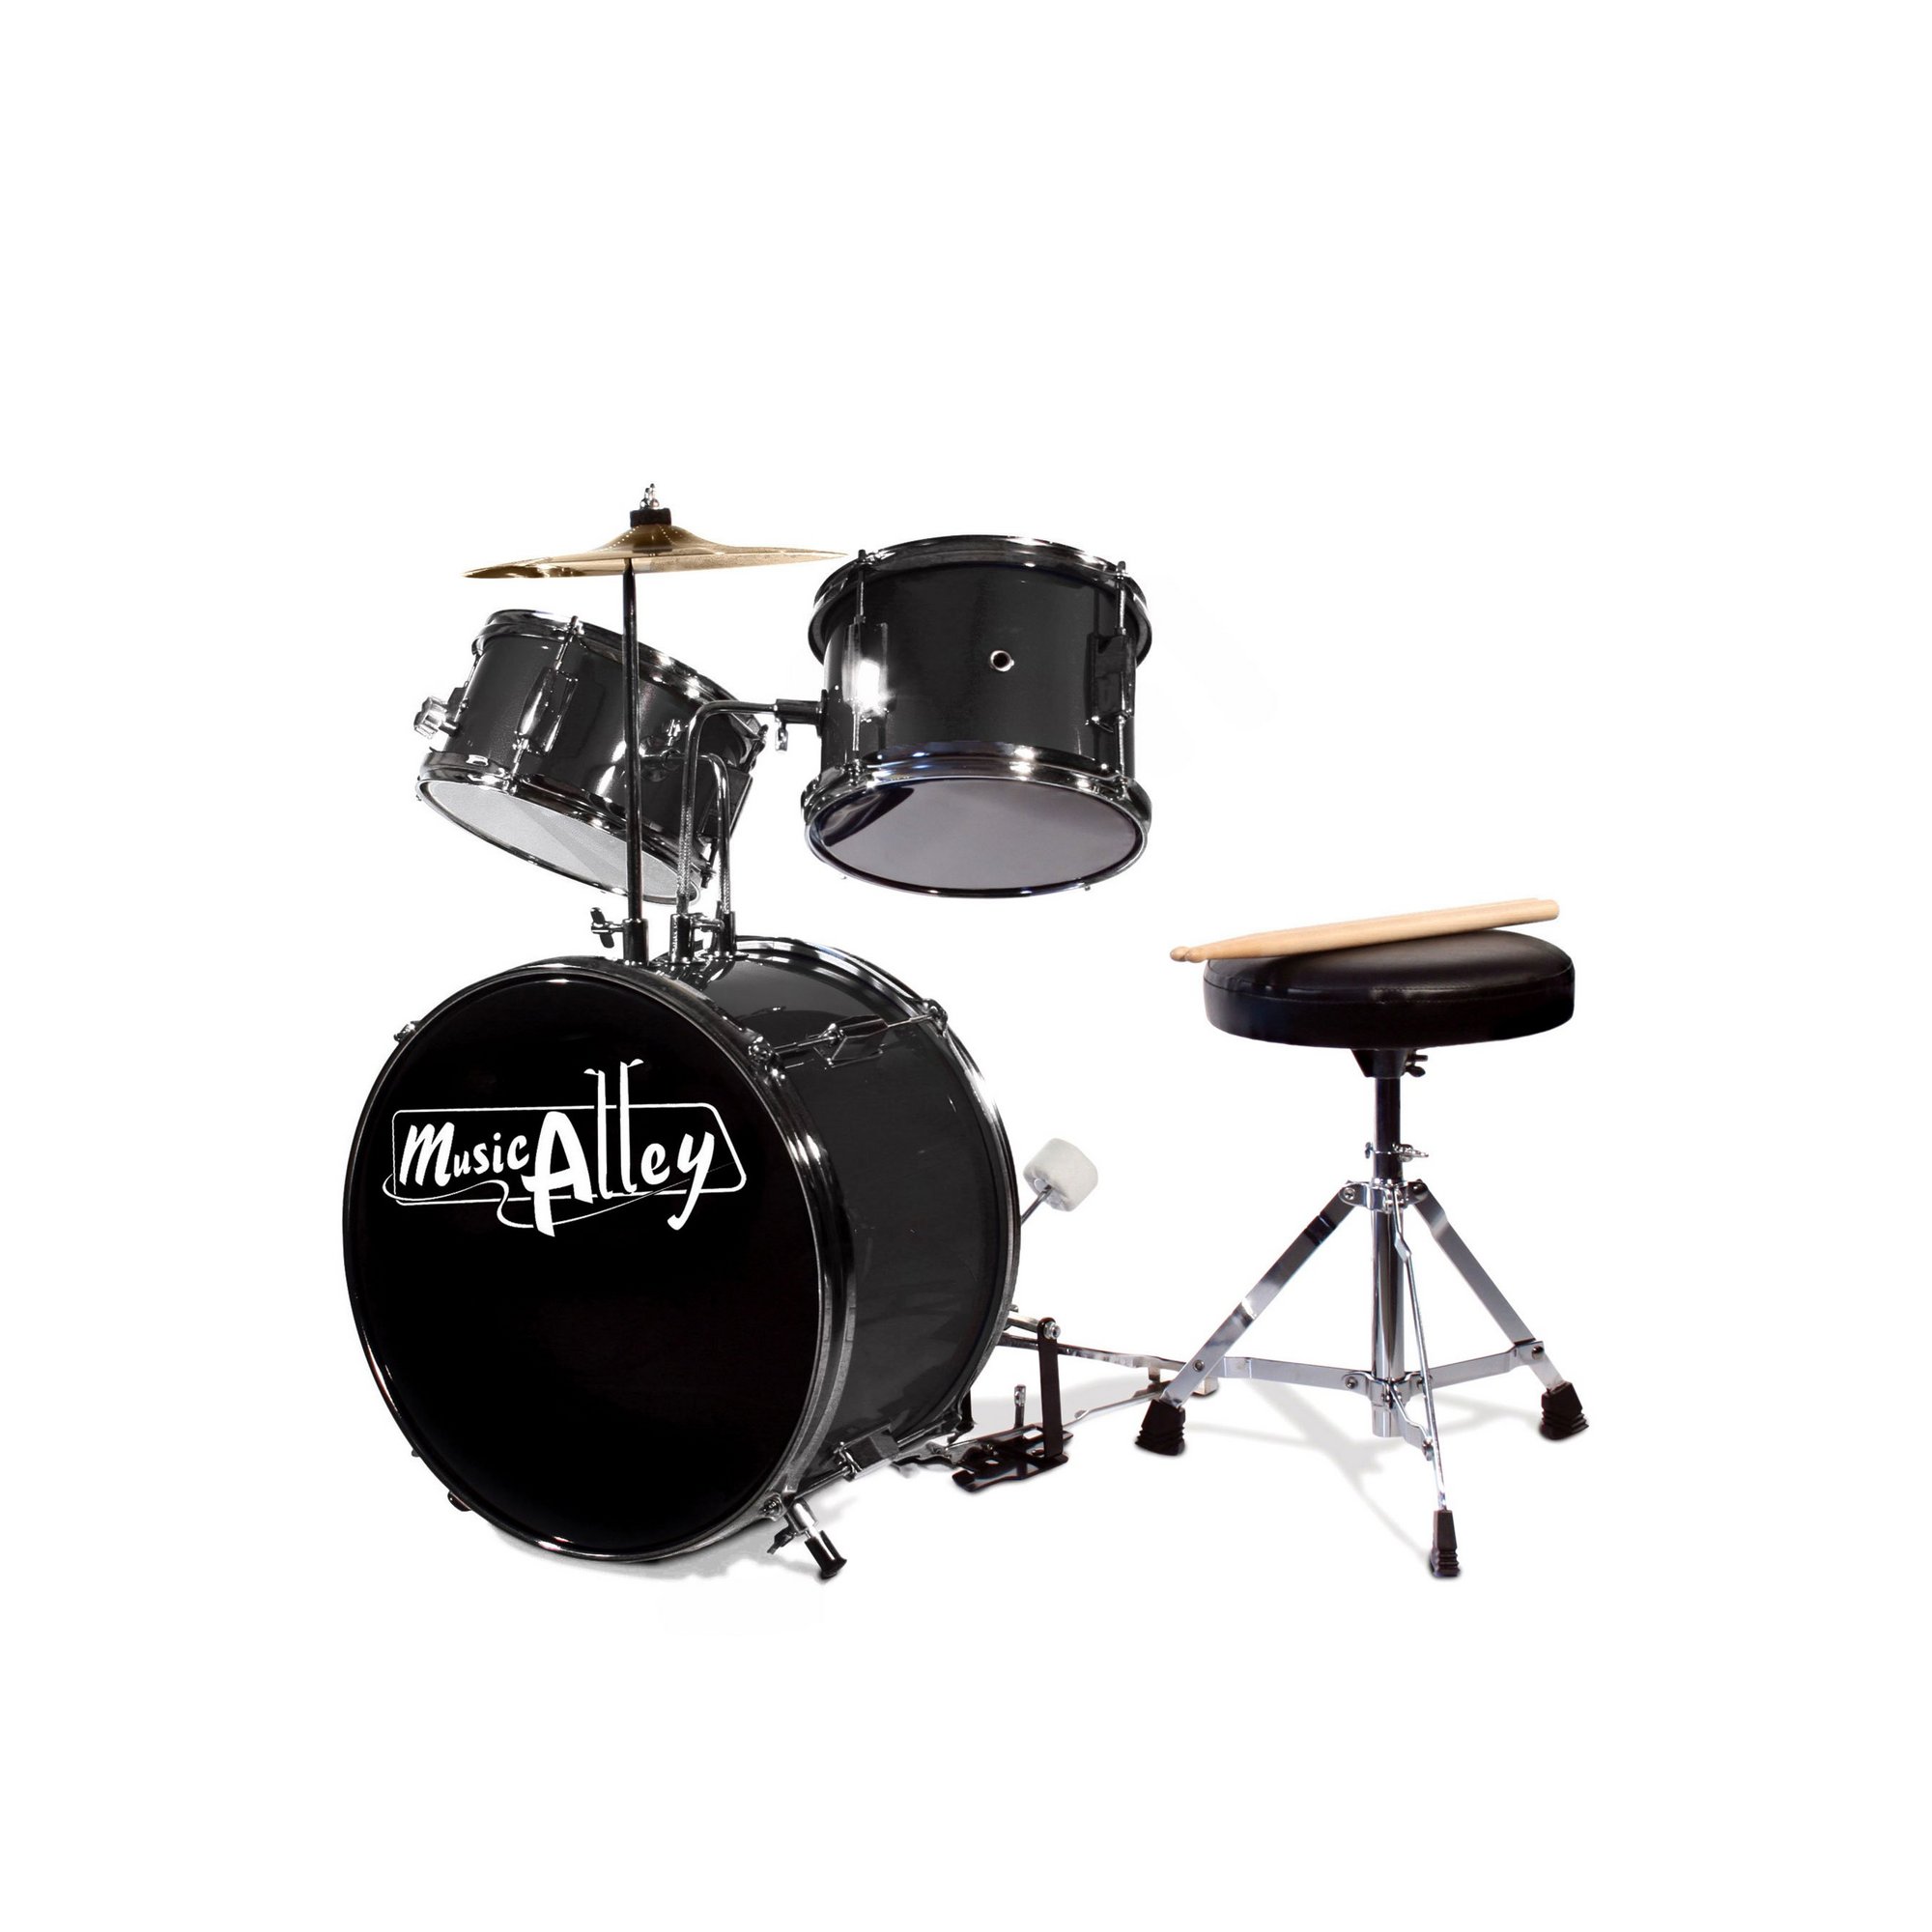 Music Alley Music Alley Junior Drum Kit with Stool and Drum Sticks | Black